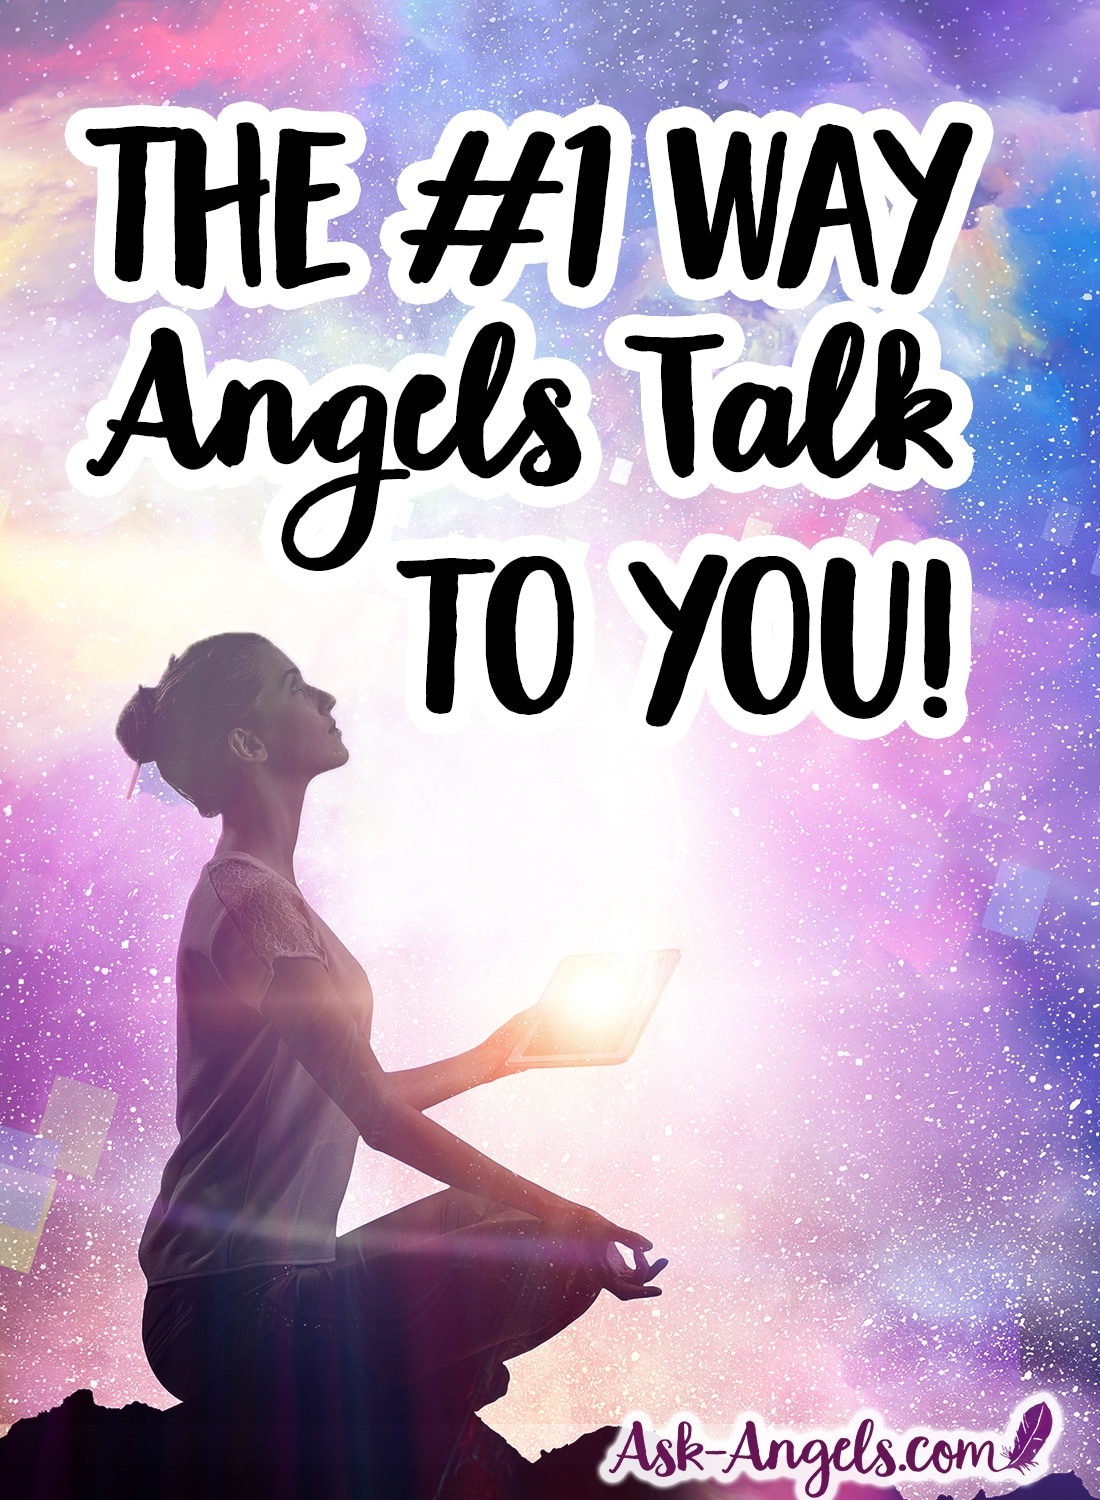 Learn the #1 Way Angels Talk to you! Receive Angel Messages now!